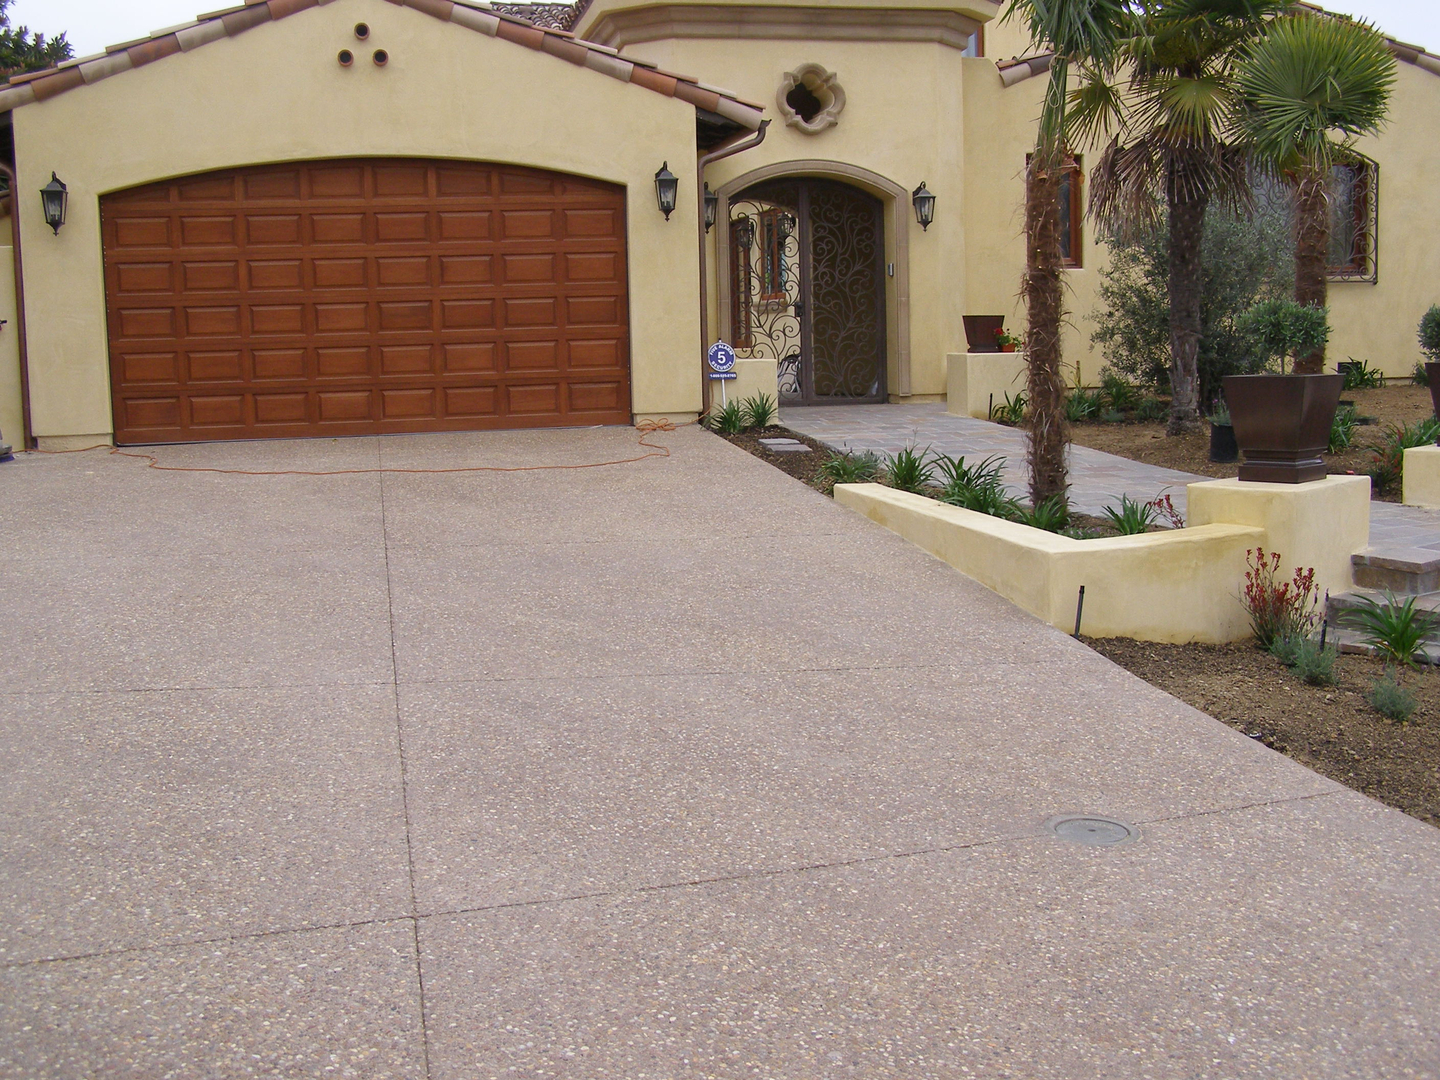 A Cement Chip Driveway Path Infront of a Garage